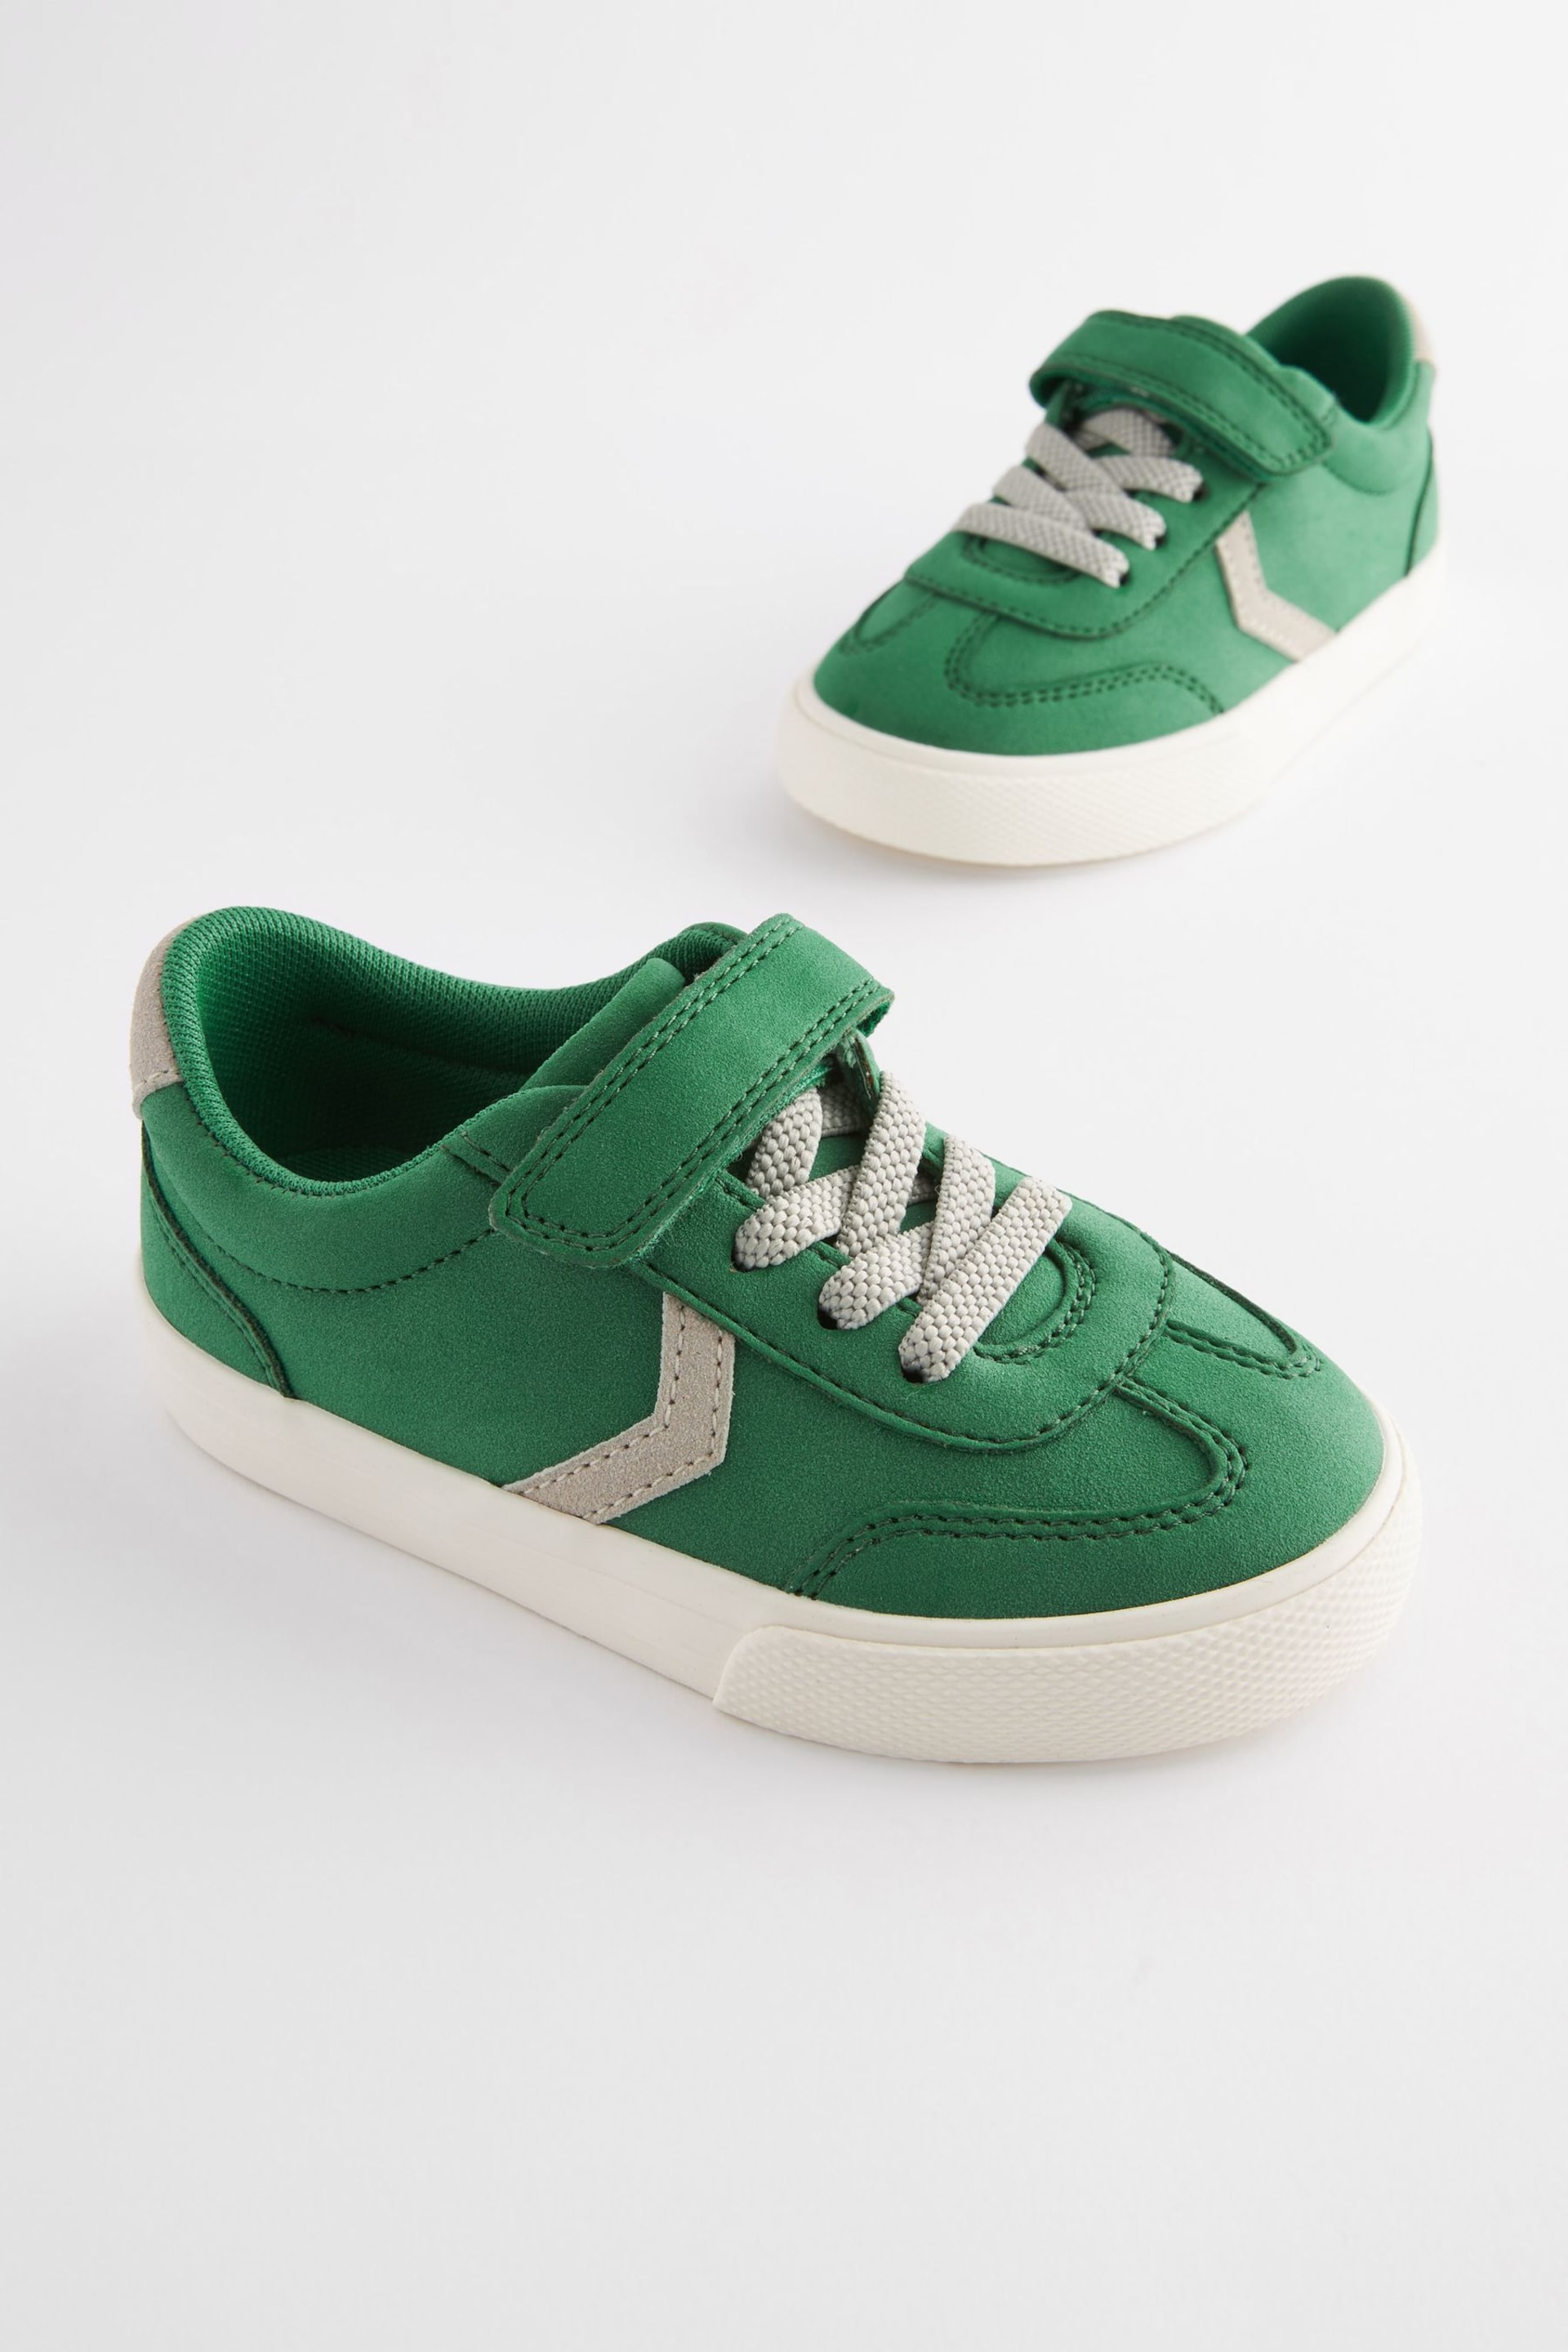 Green Standard Fit (F) Touch Fastening Chevron Trainers - Image 4 of 8